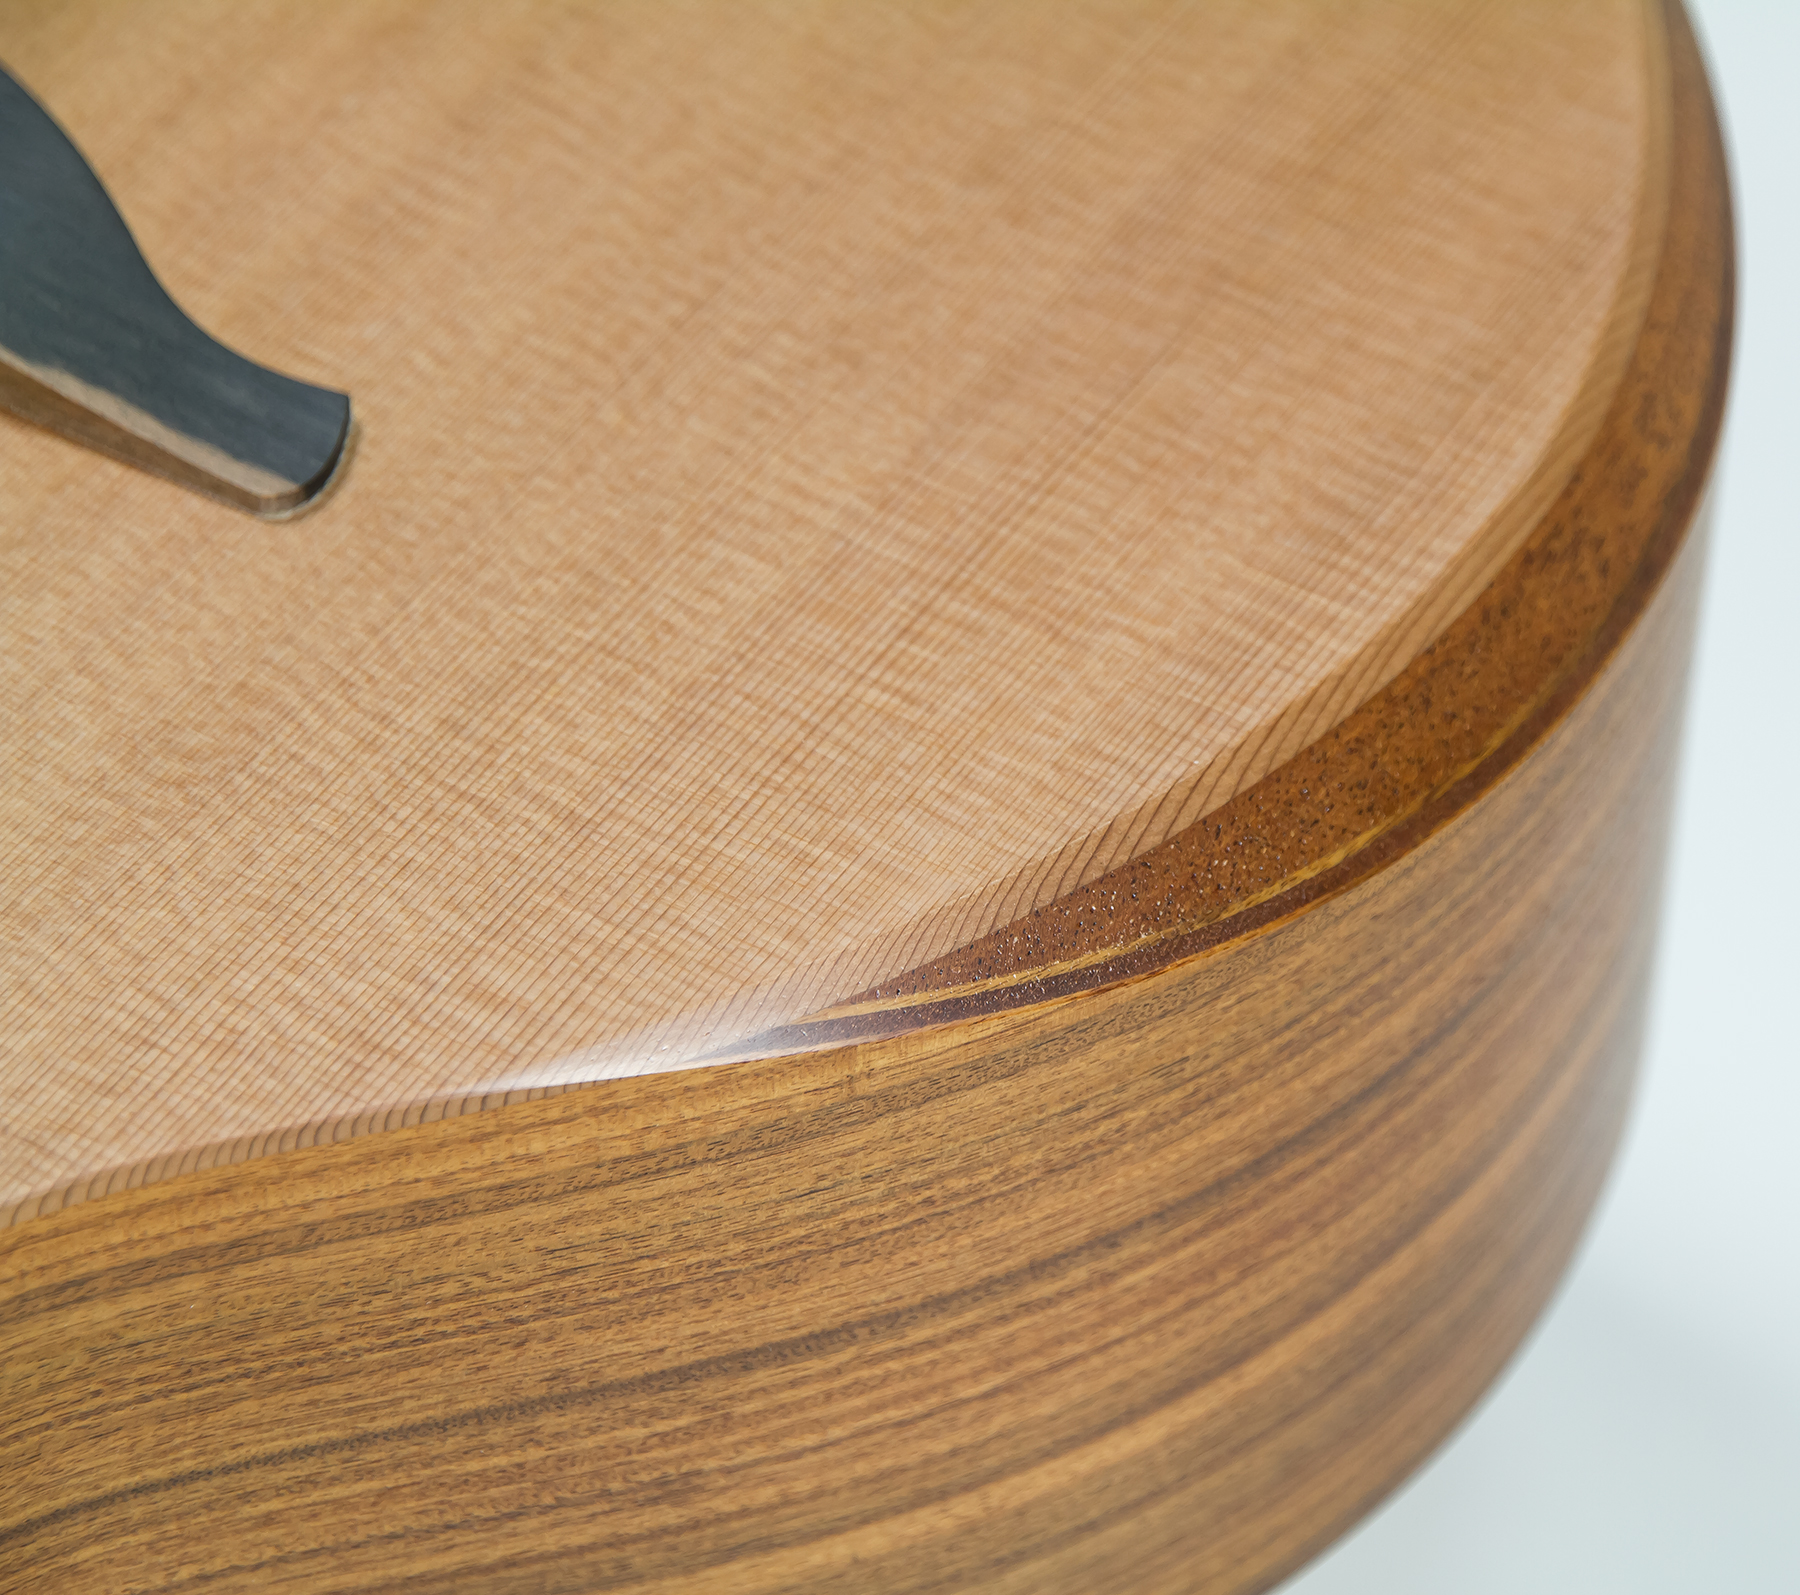 Sheeran By Lowden S03 Orchestra Model Cedre Palissandre Eb +housse - Natural Satin - Guitare Acoustique - Variation 5